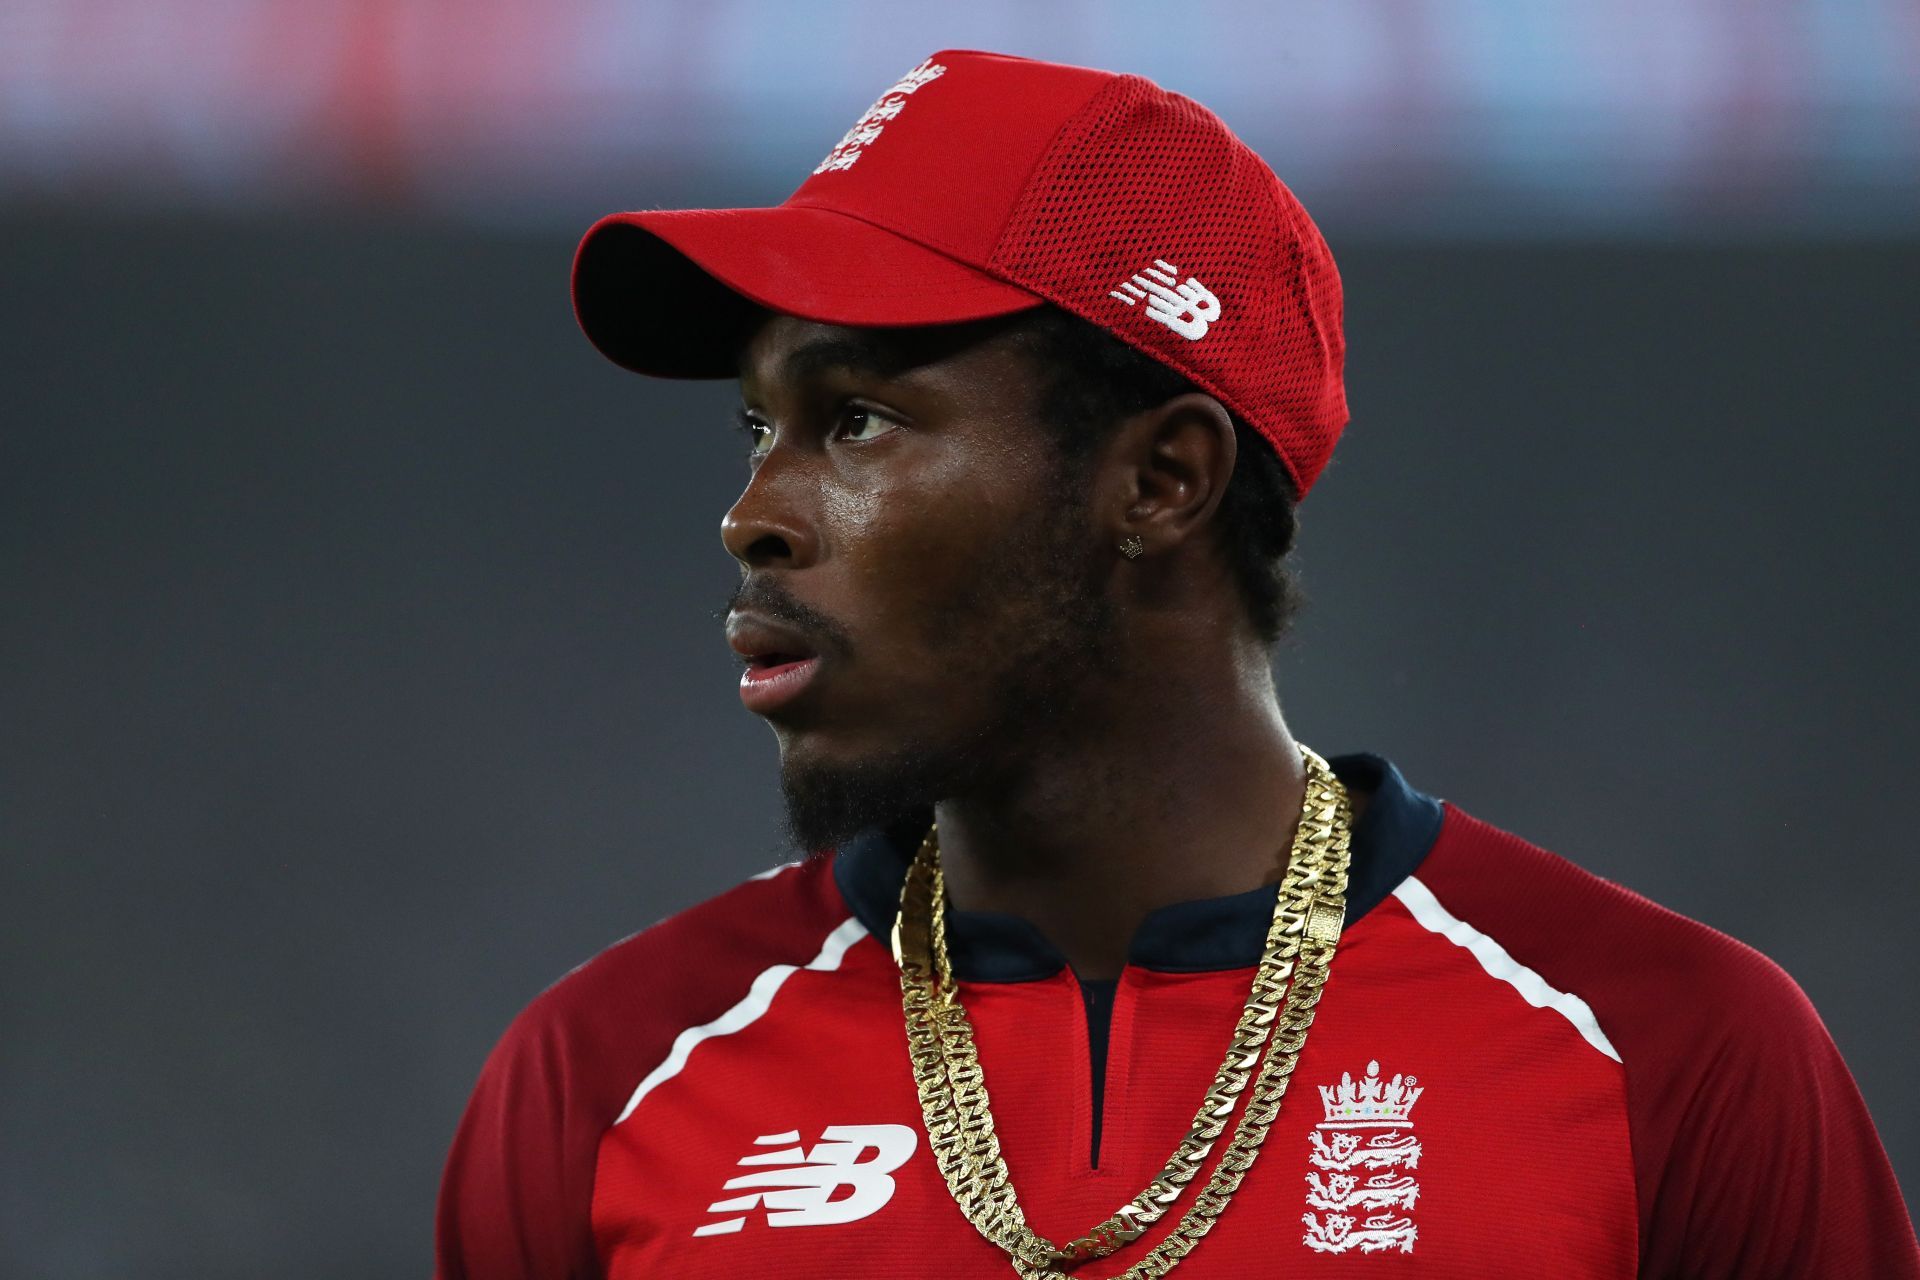 Injured England pacer Jofra Archer (Image Credits: Getty)